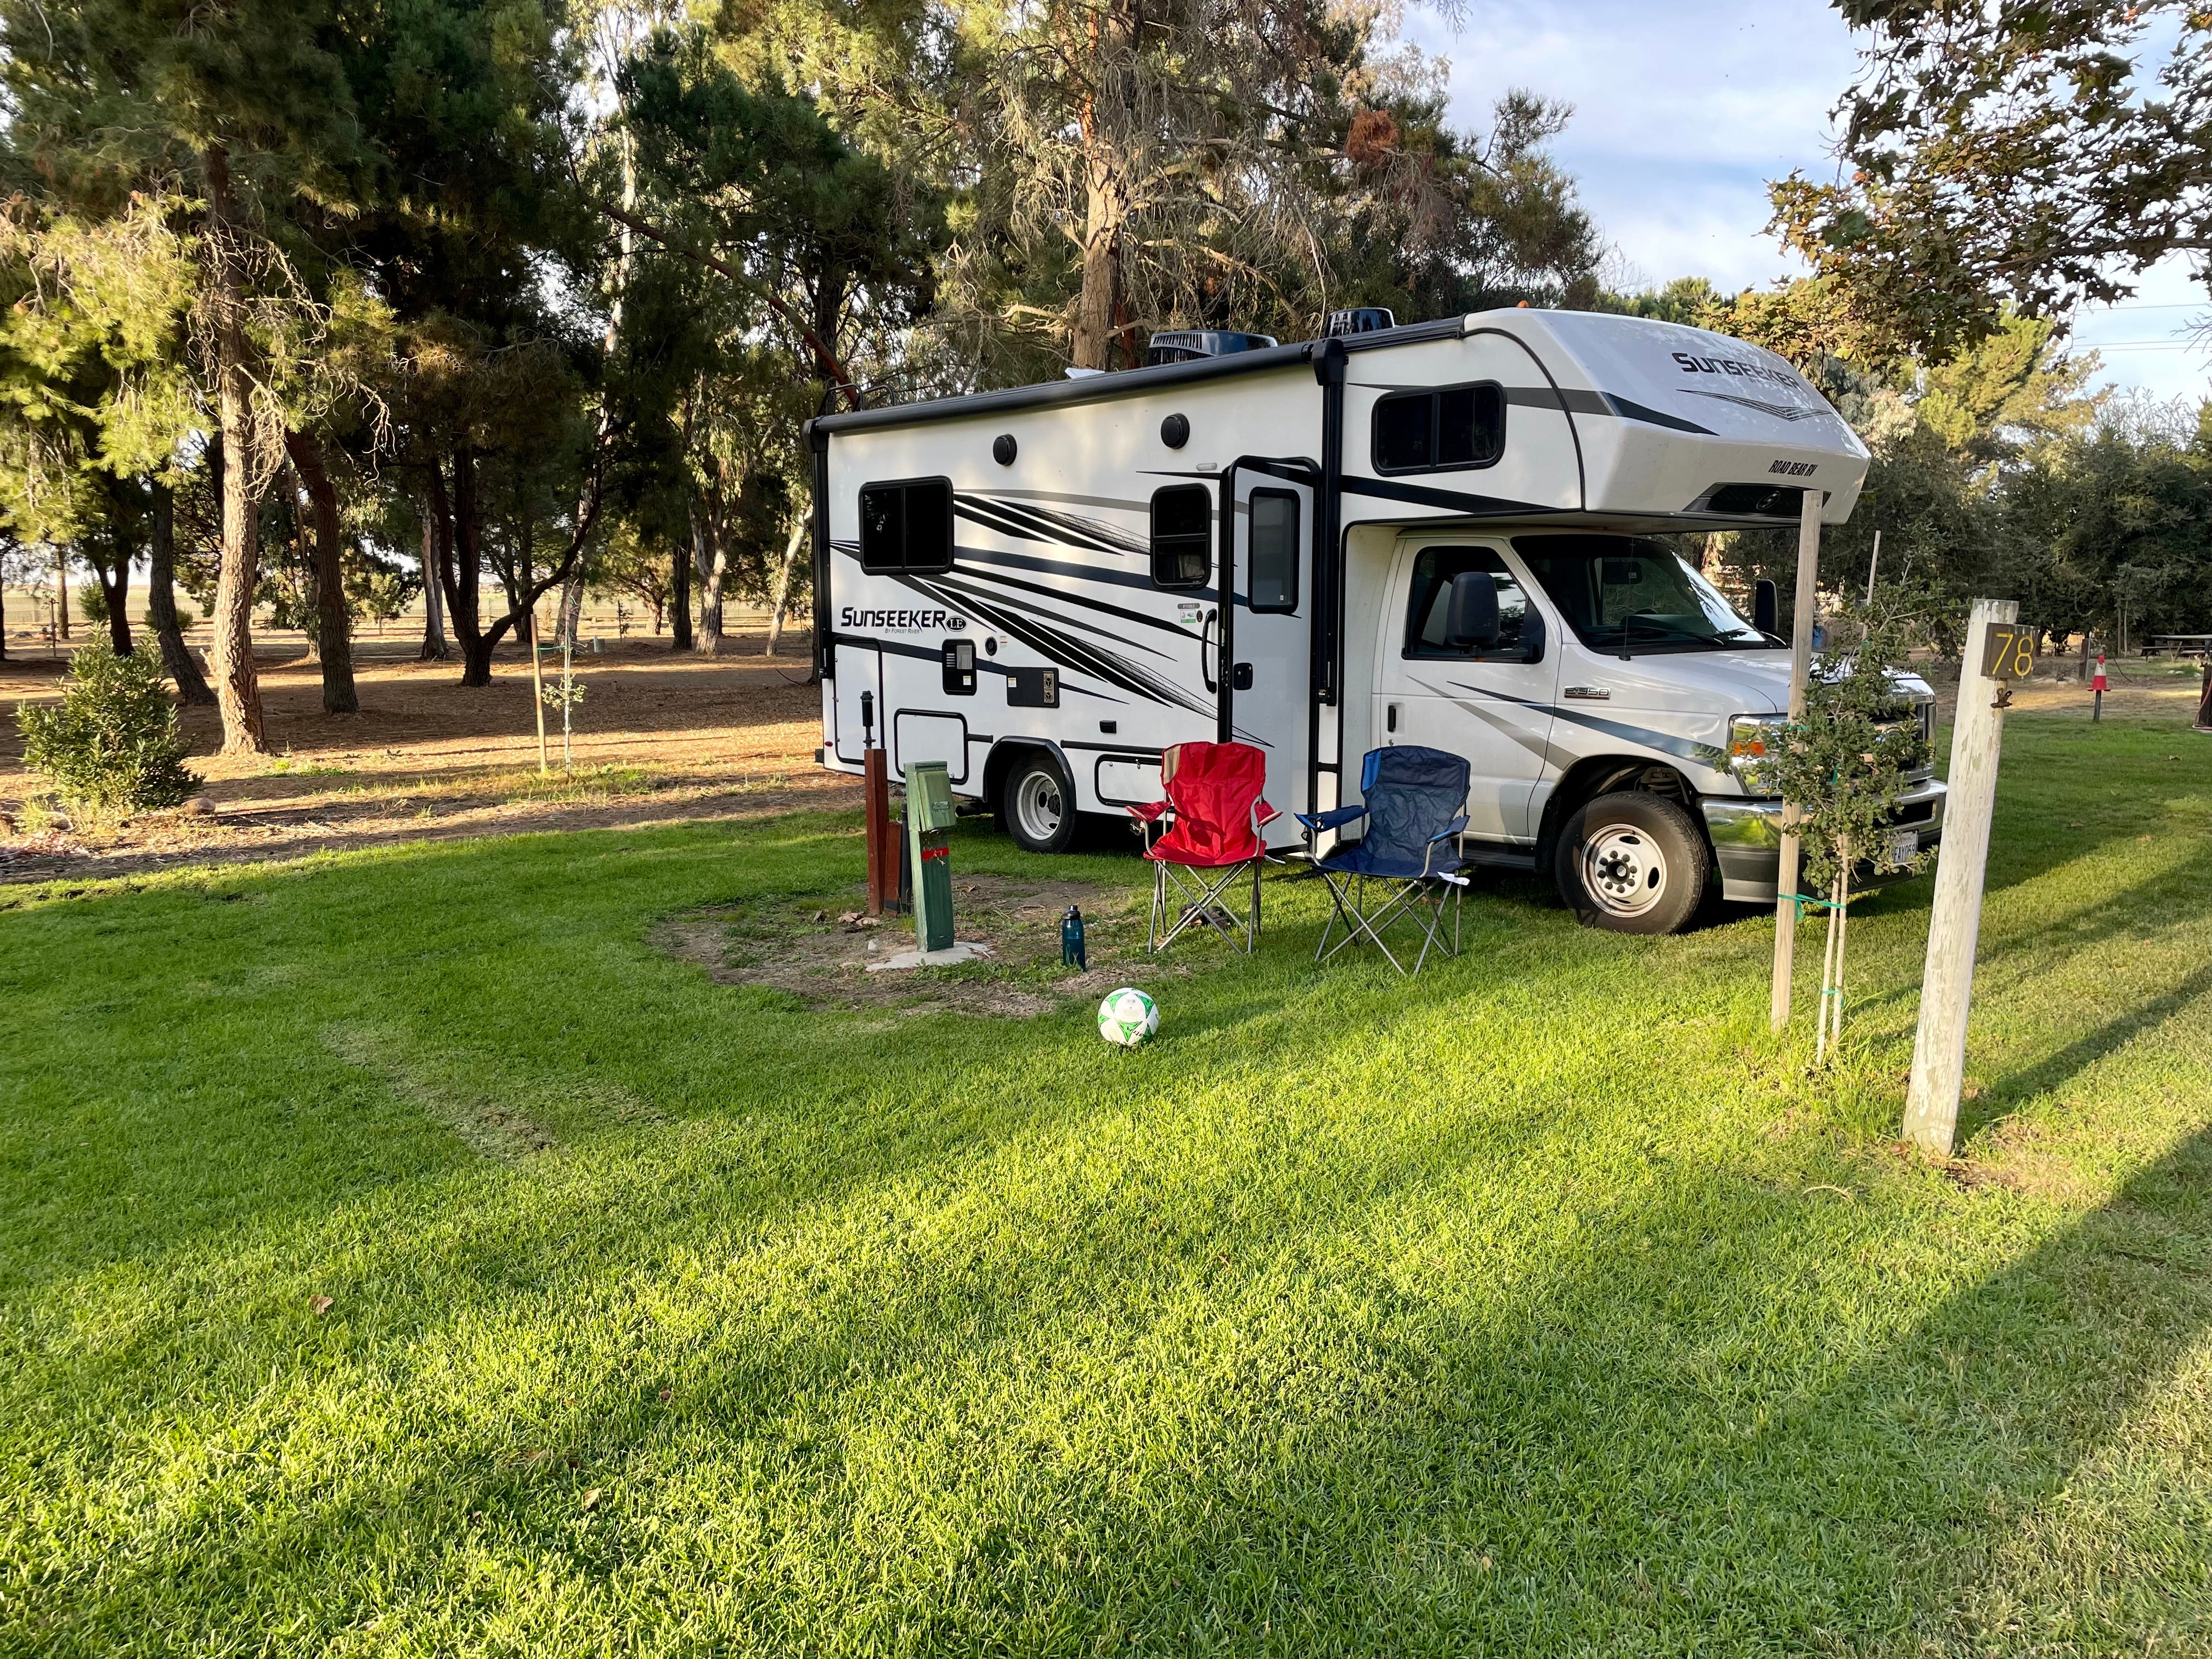 Camper submitted image from San Lorenzo Park - 1